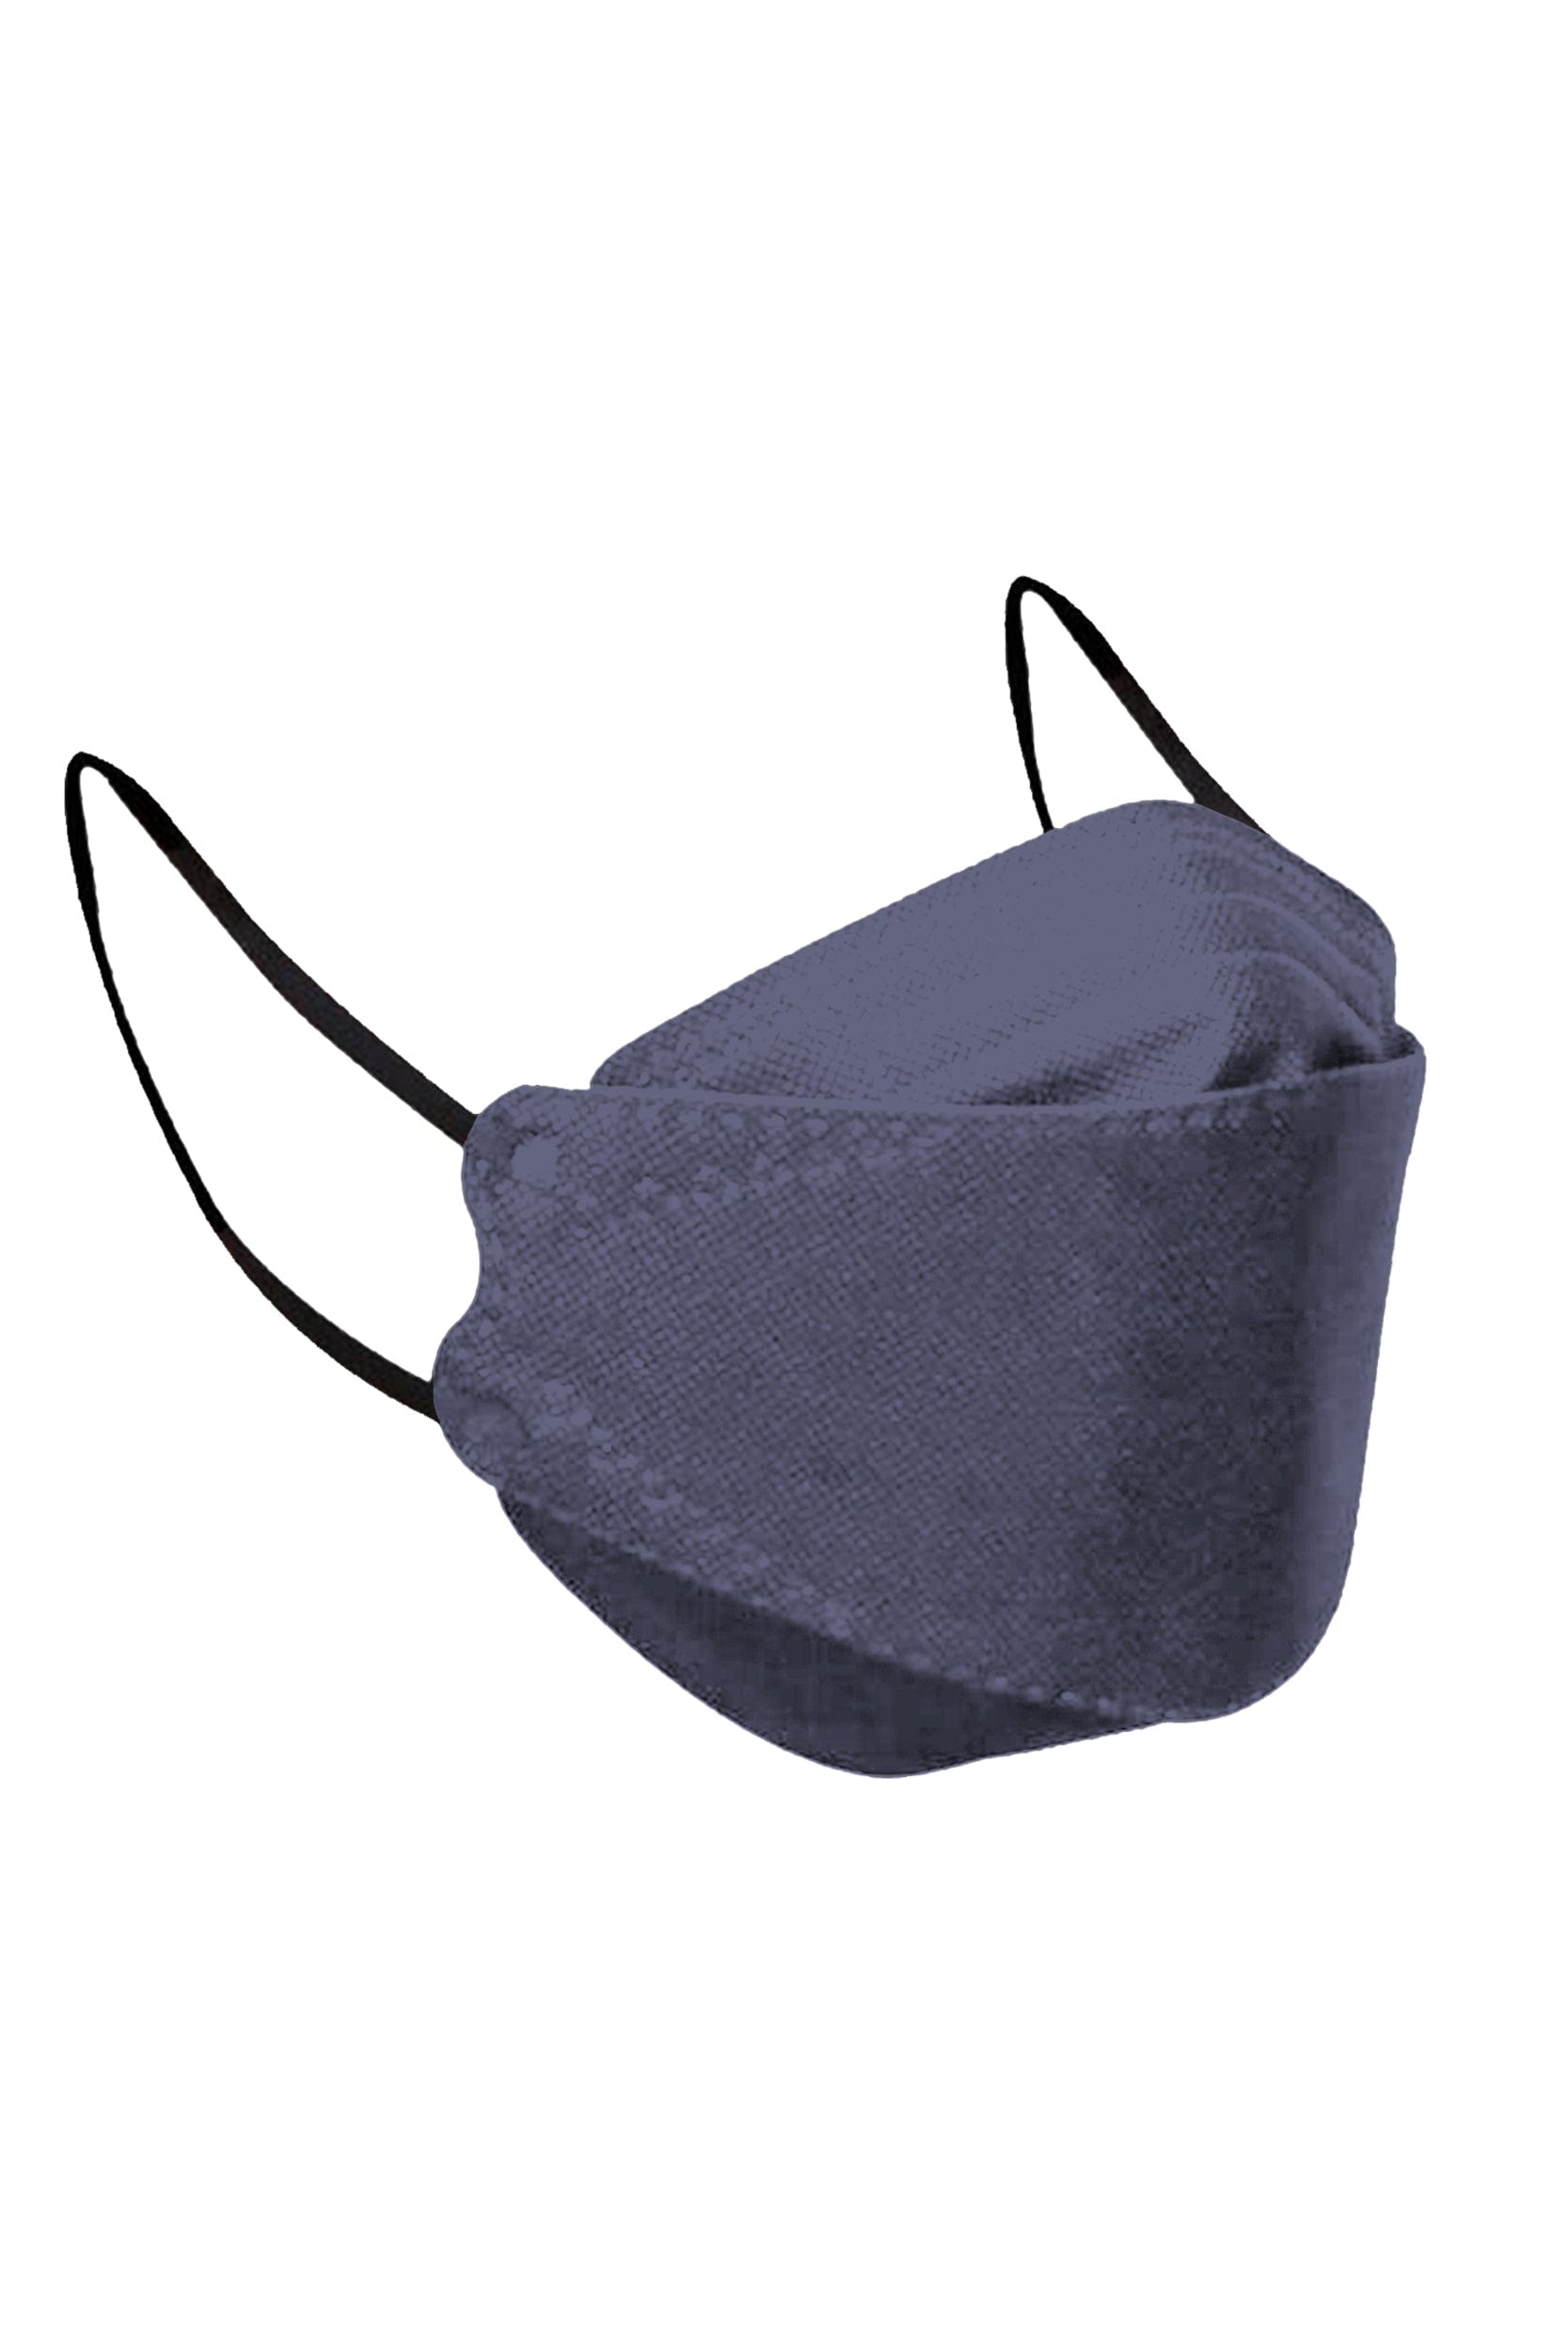 Stylish light blue KF94 face mask, with soft black ear loops and high quality fabric. 